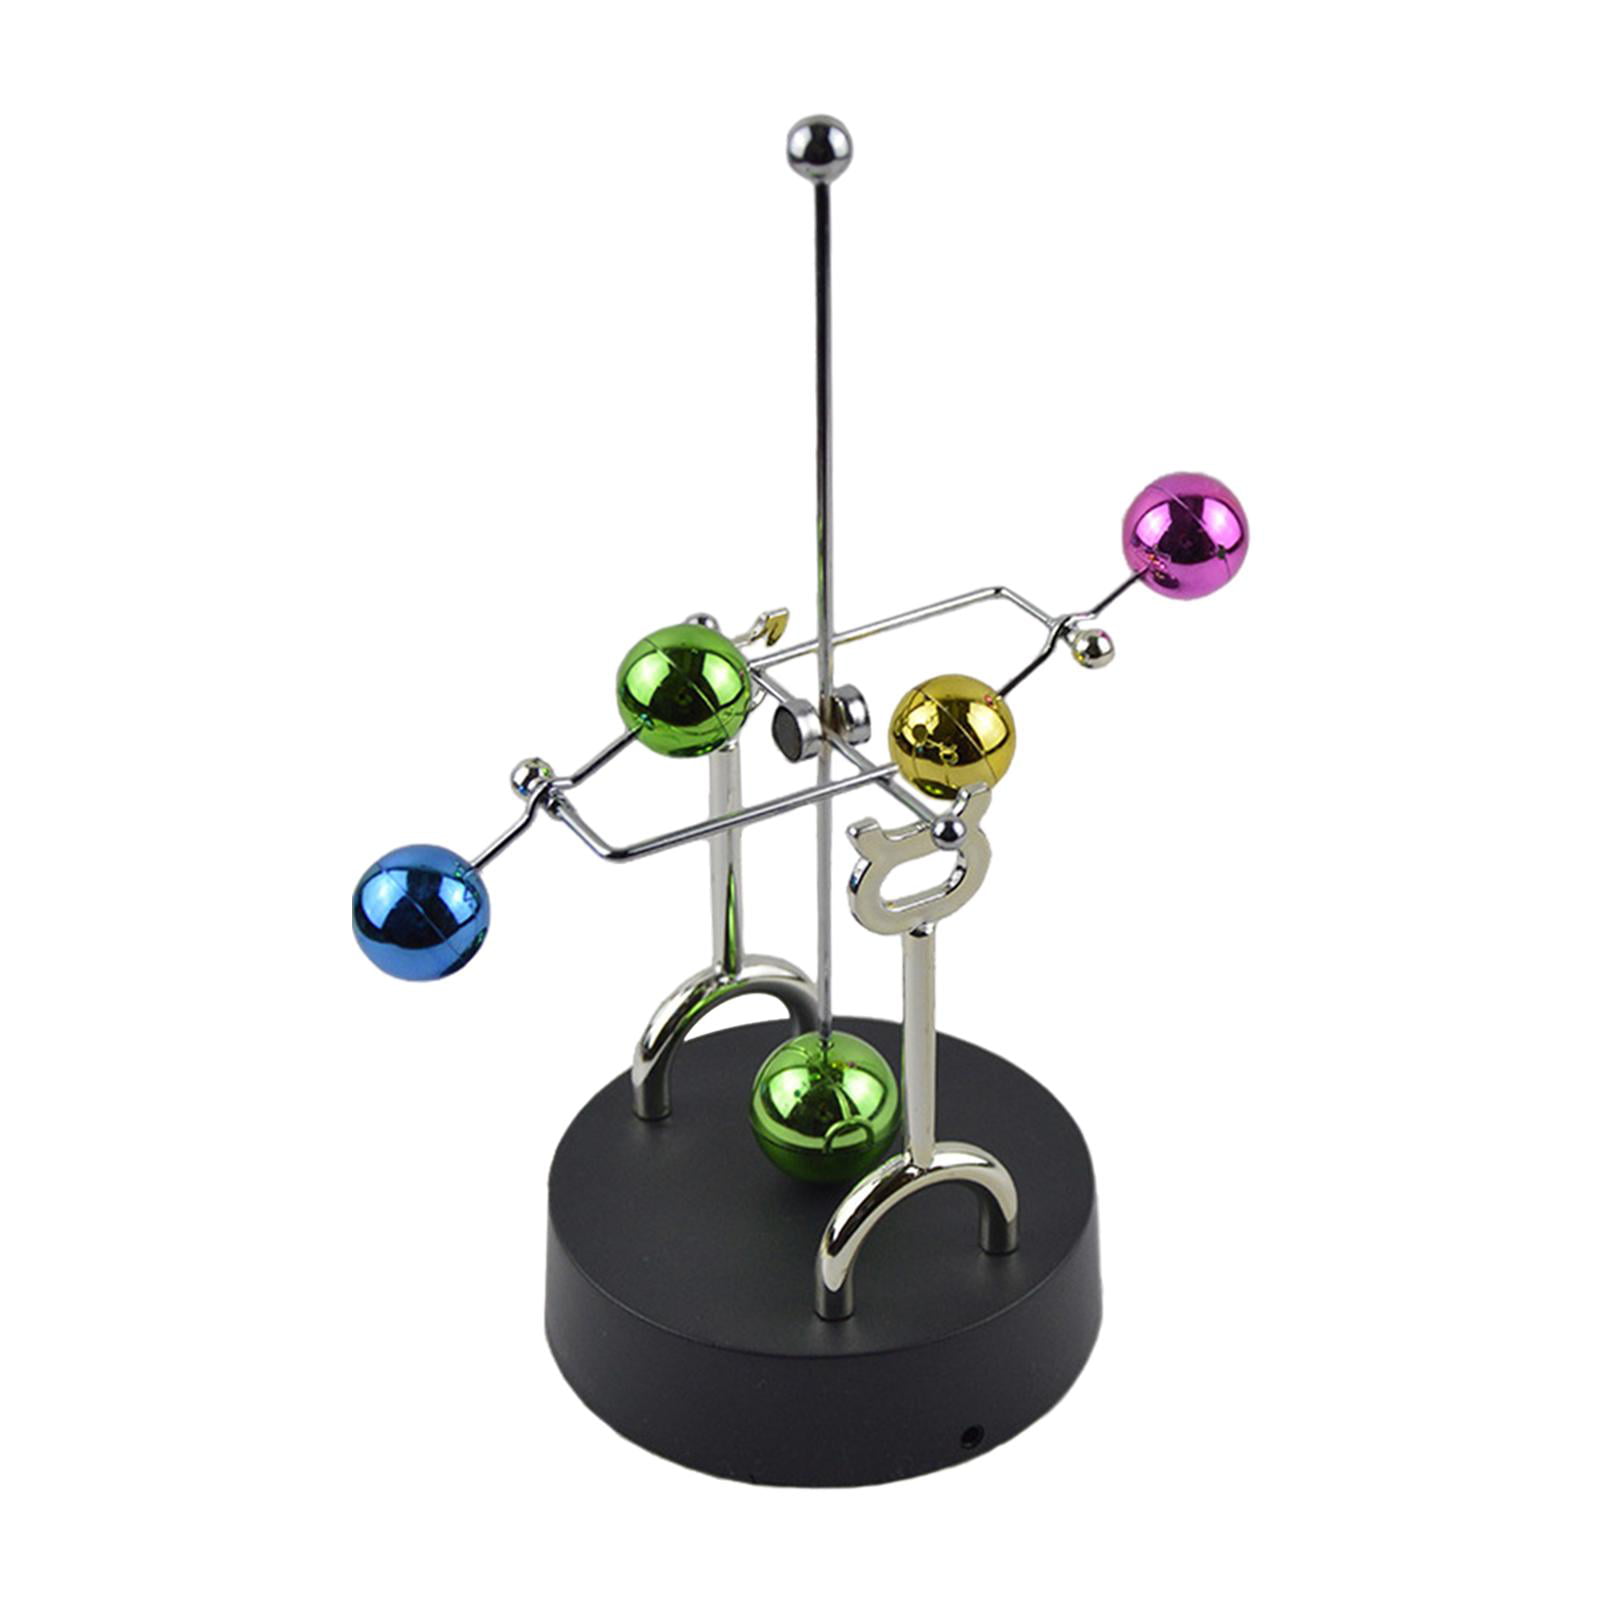 Asteroid Rotating Model Perpetual Motion Plastic Metal Decoration Home Office 